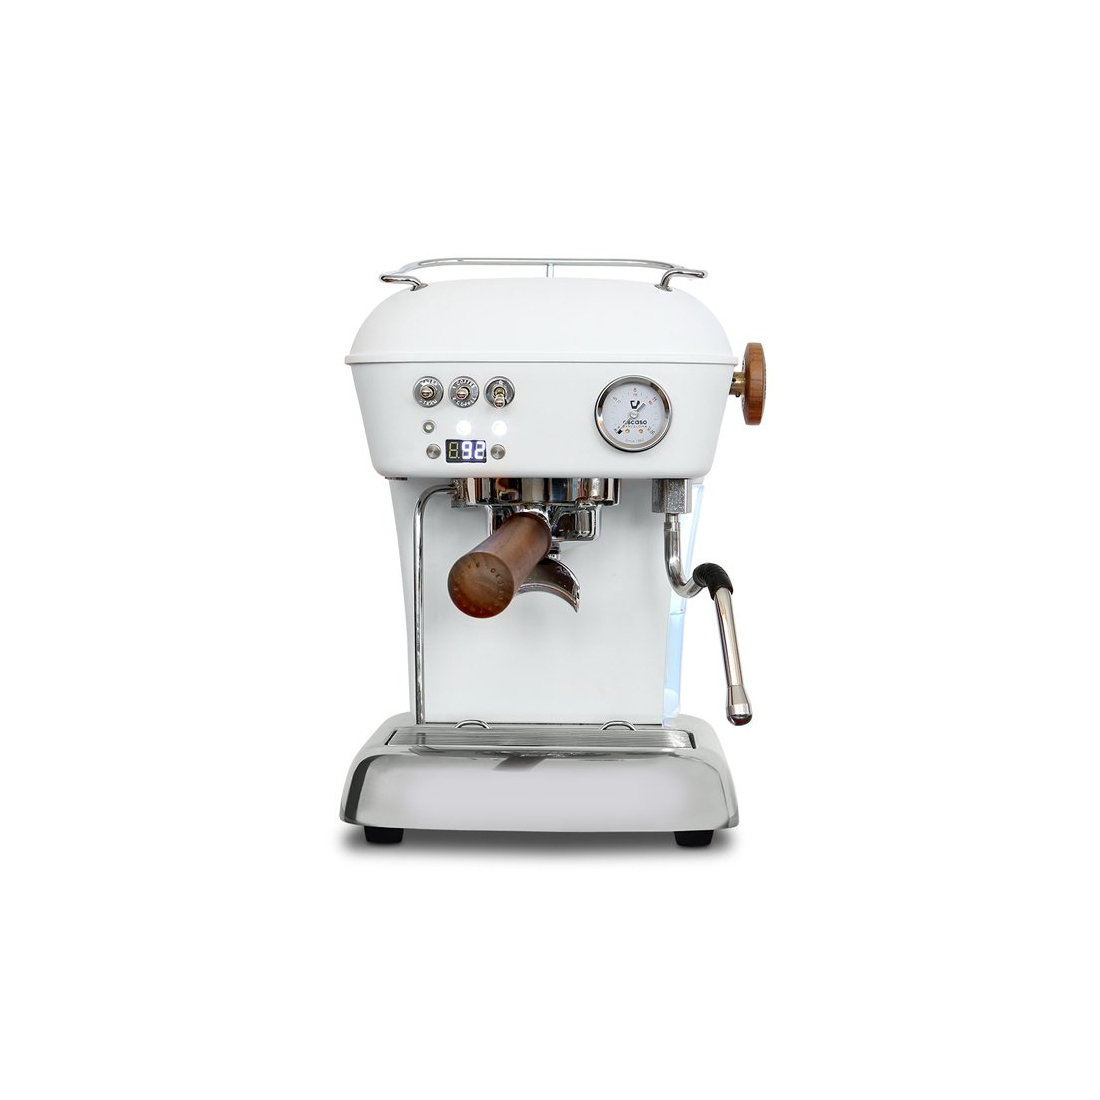 ASCASO ,DR.549, 1 Group Coffee Machine DREAM PID White with Wooden Handles|mkayn|مكاين